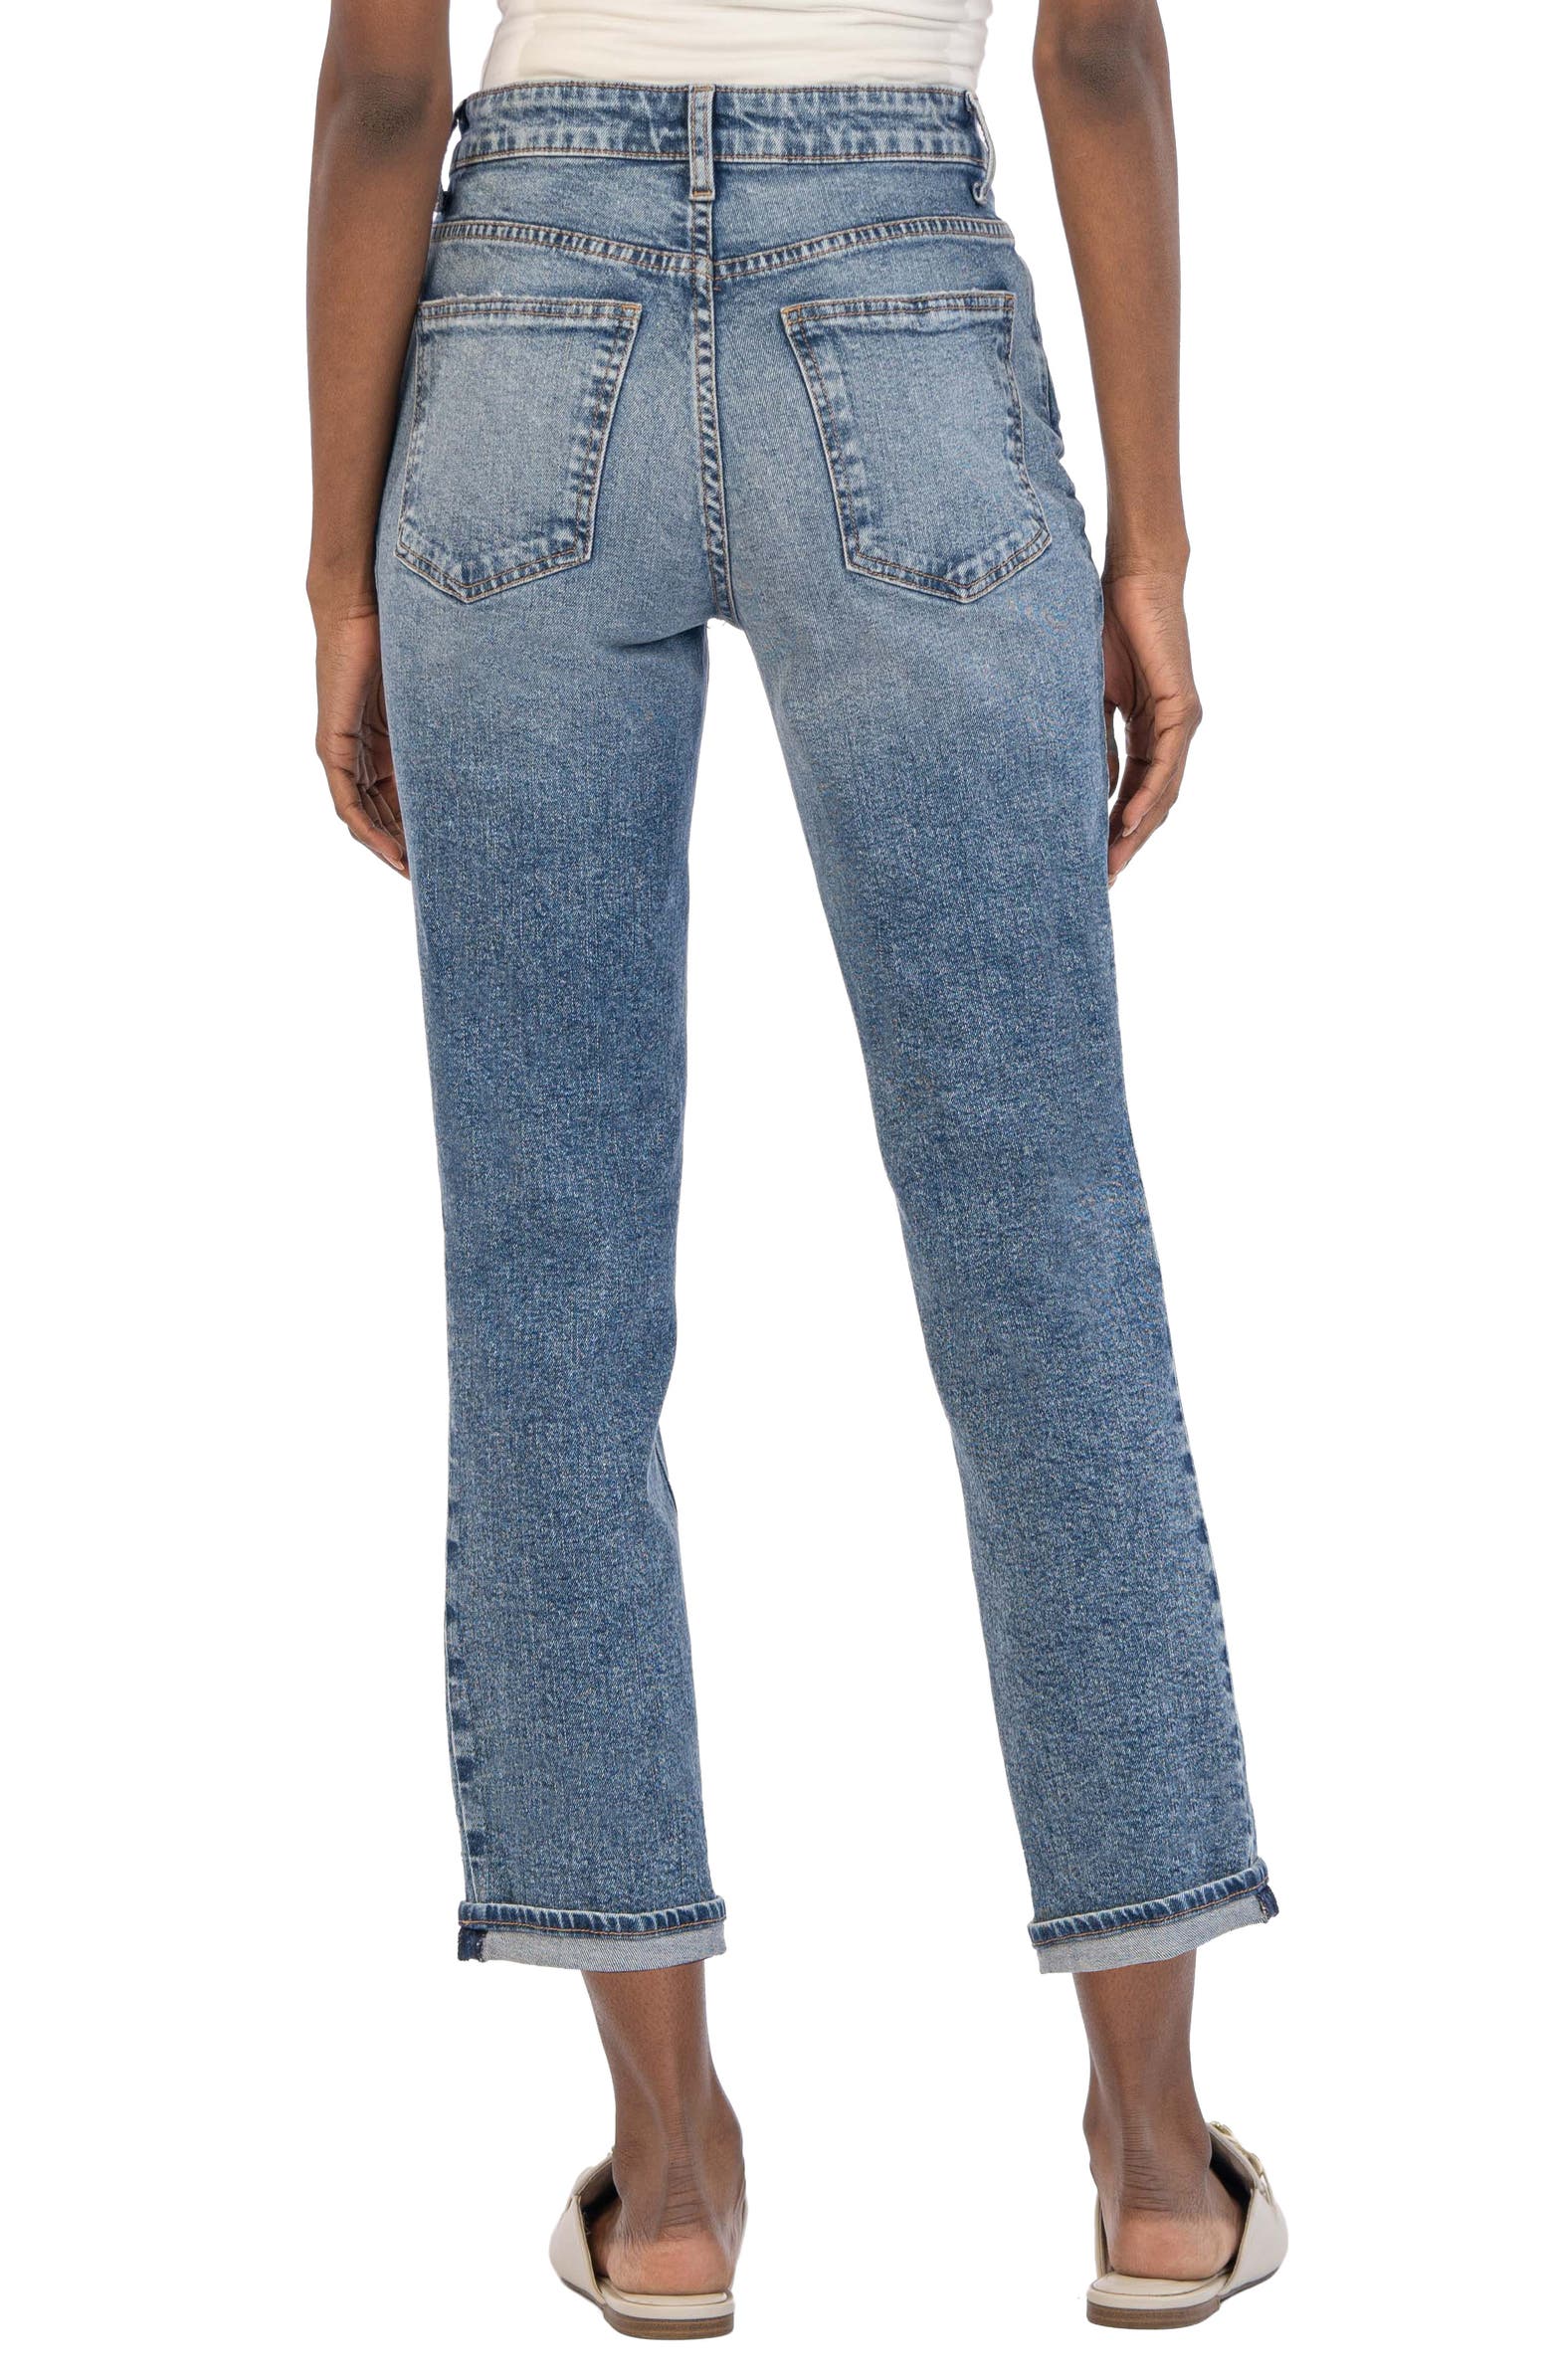 Kut From The Kloth Rachael Fab Ab High Waist Mom Jeans Nordstrom